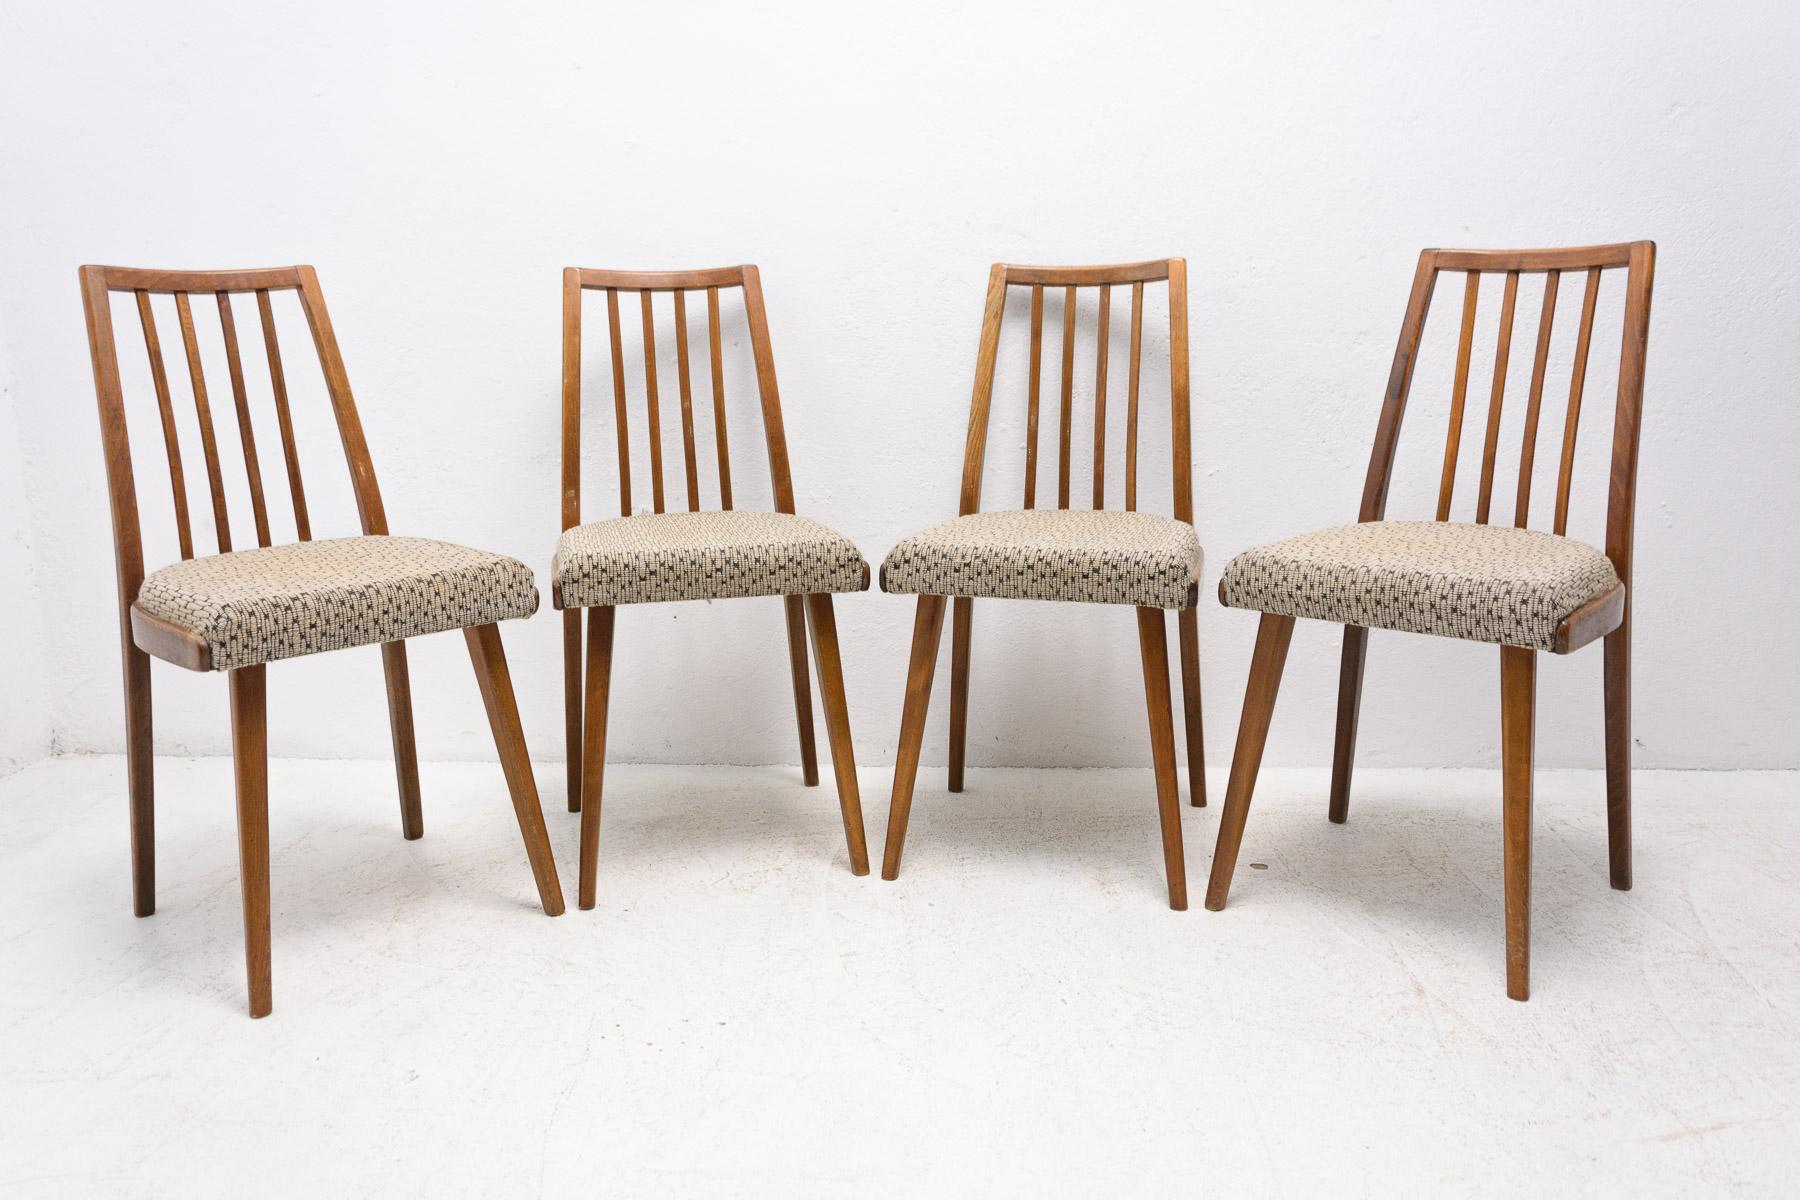 These dining chairs were made in the former Czechoslovakia in the 1960´s. The structure is made of beech wood. The chairs are fully functional and are in good condition.

Price is for the set of four

Measures: Height: 85 cm

width: 42